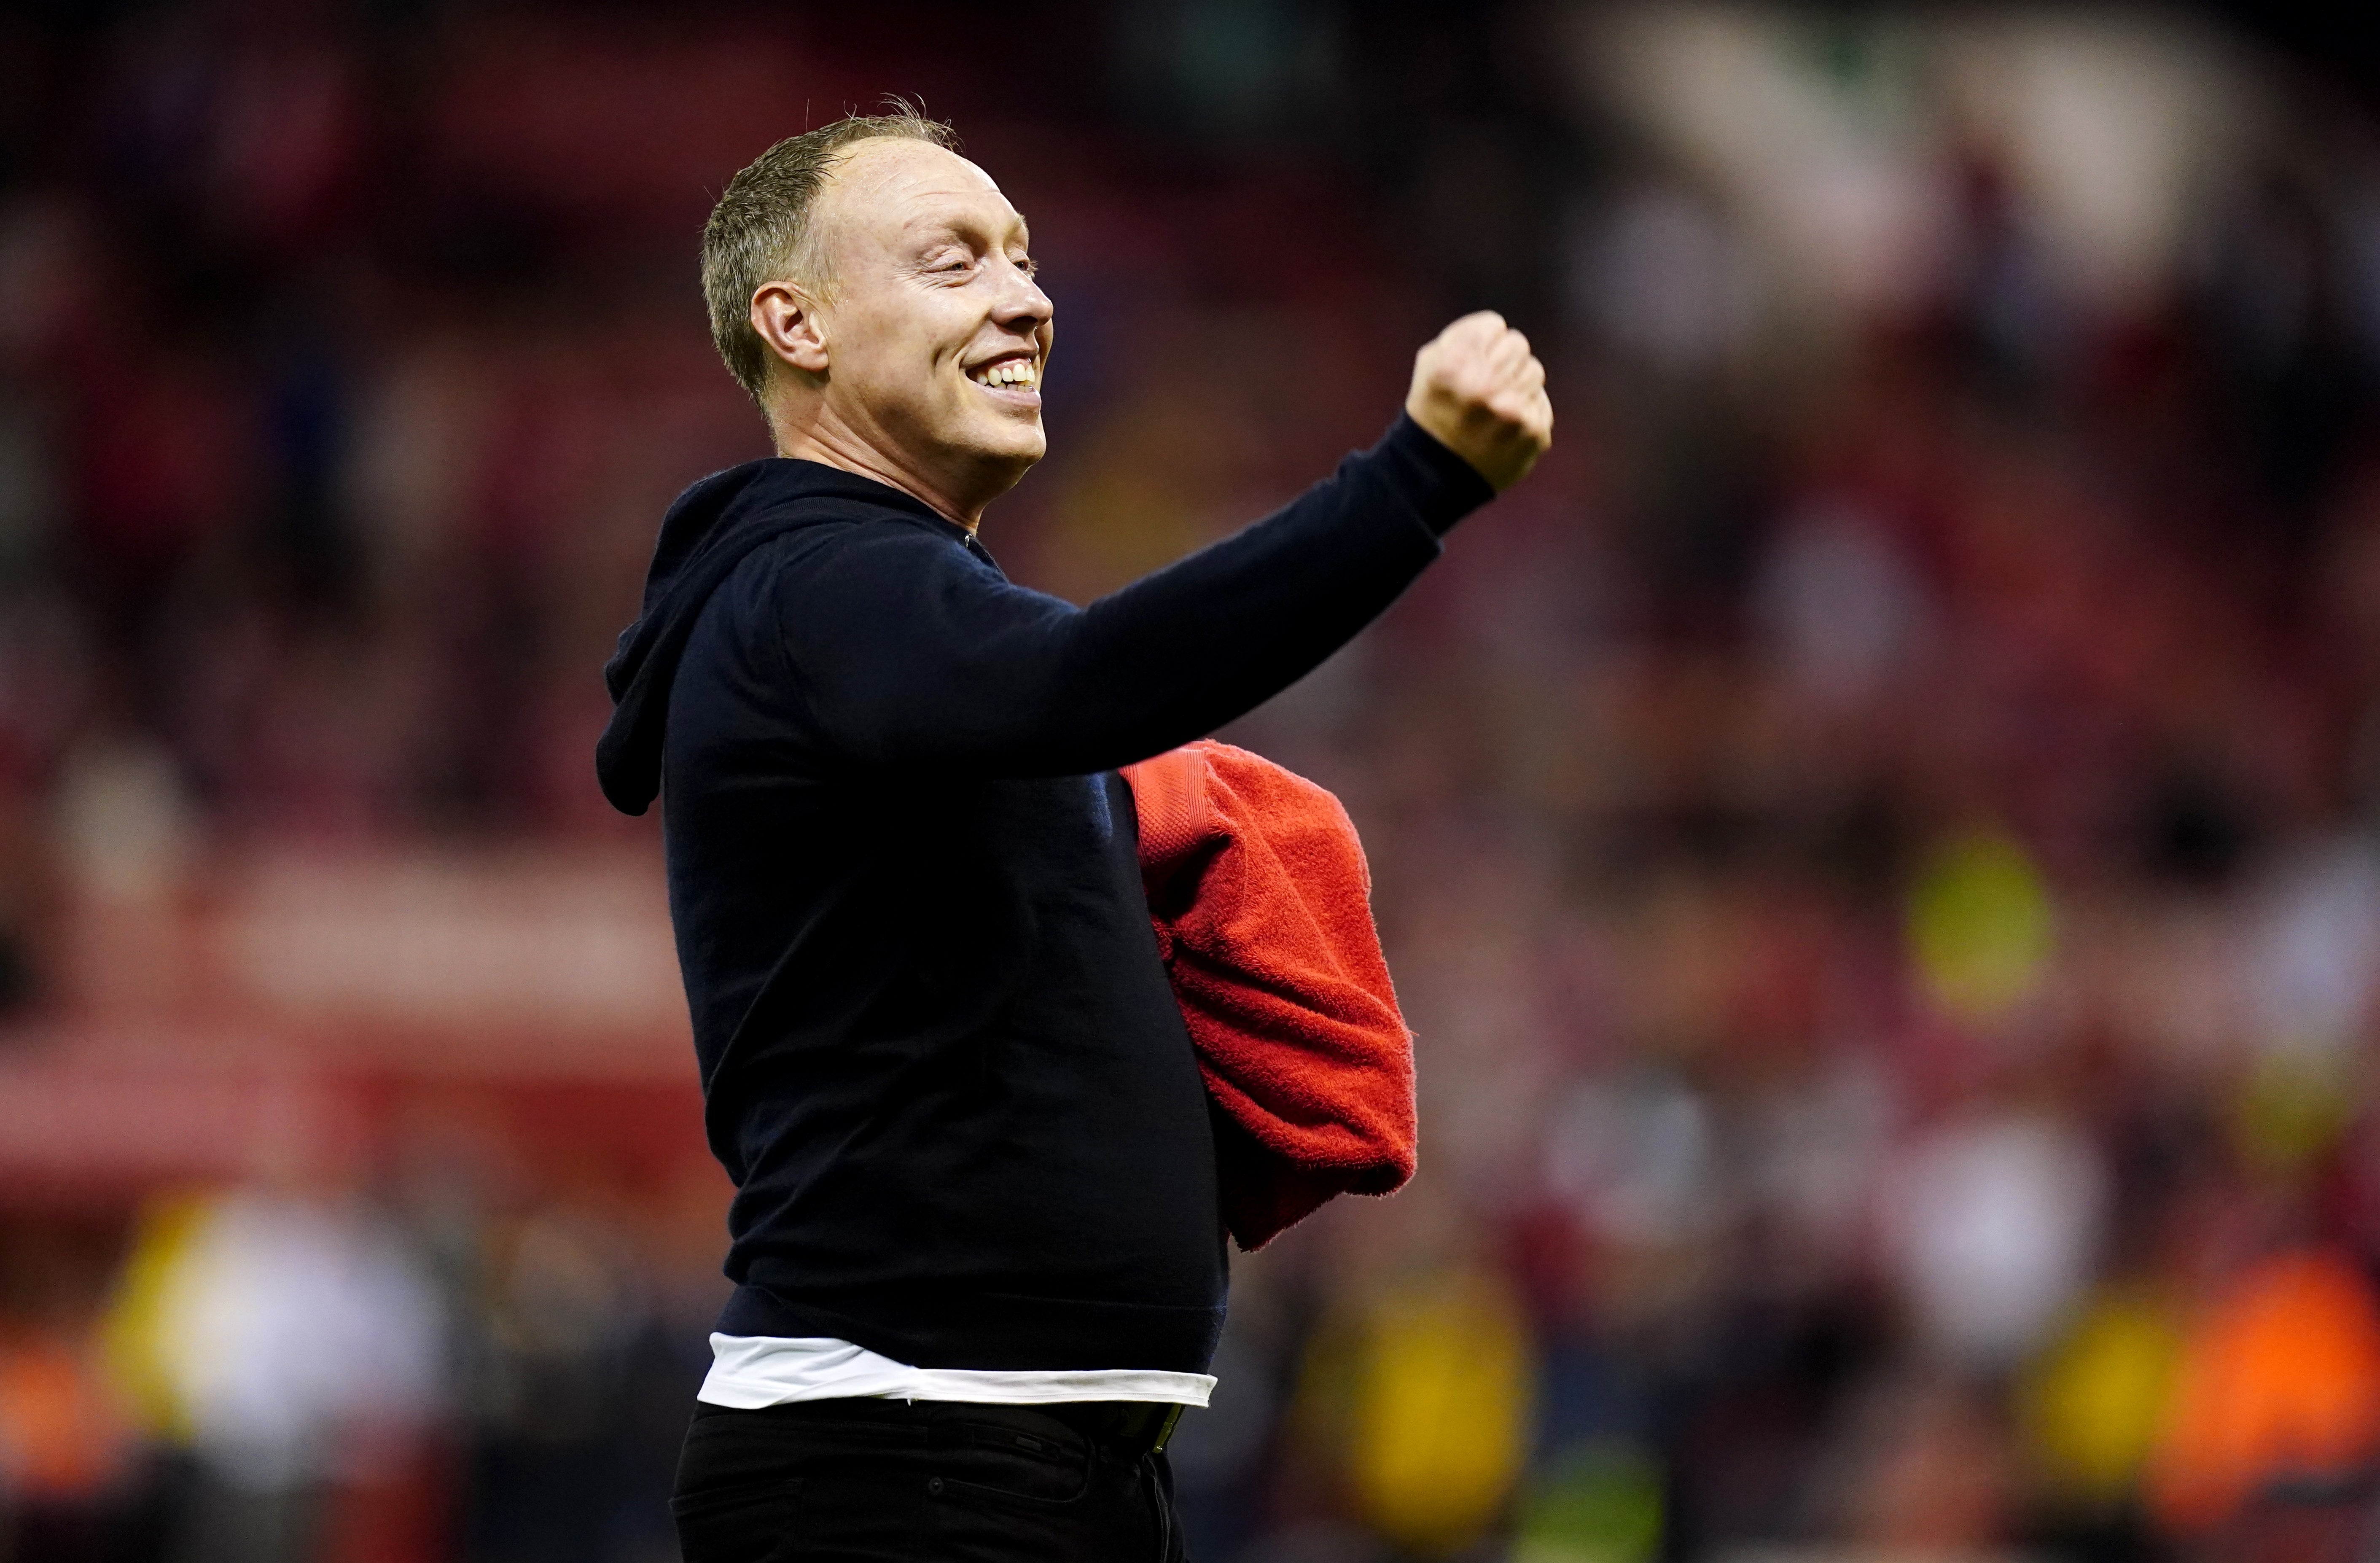 Steve Cooper wants Nottingham Forest to embrace their past ahead of the Championship play-off final (Mike Egerton/PA)